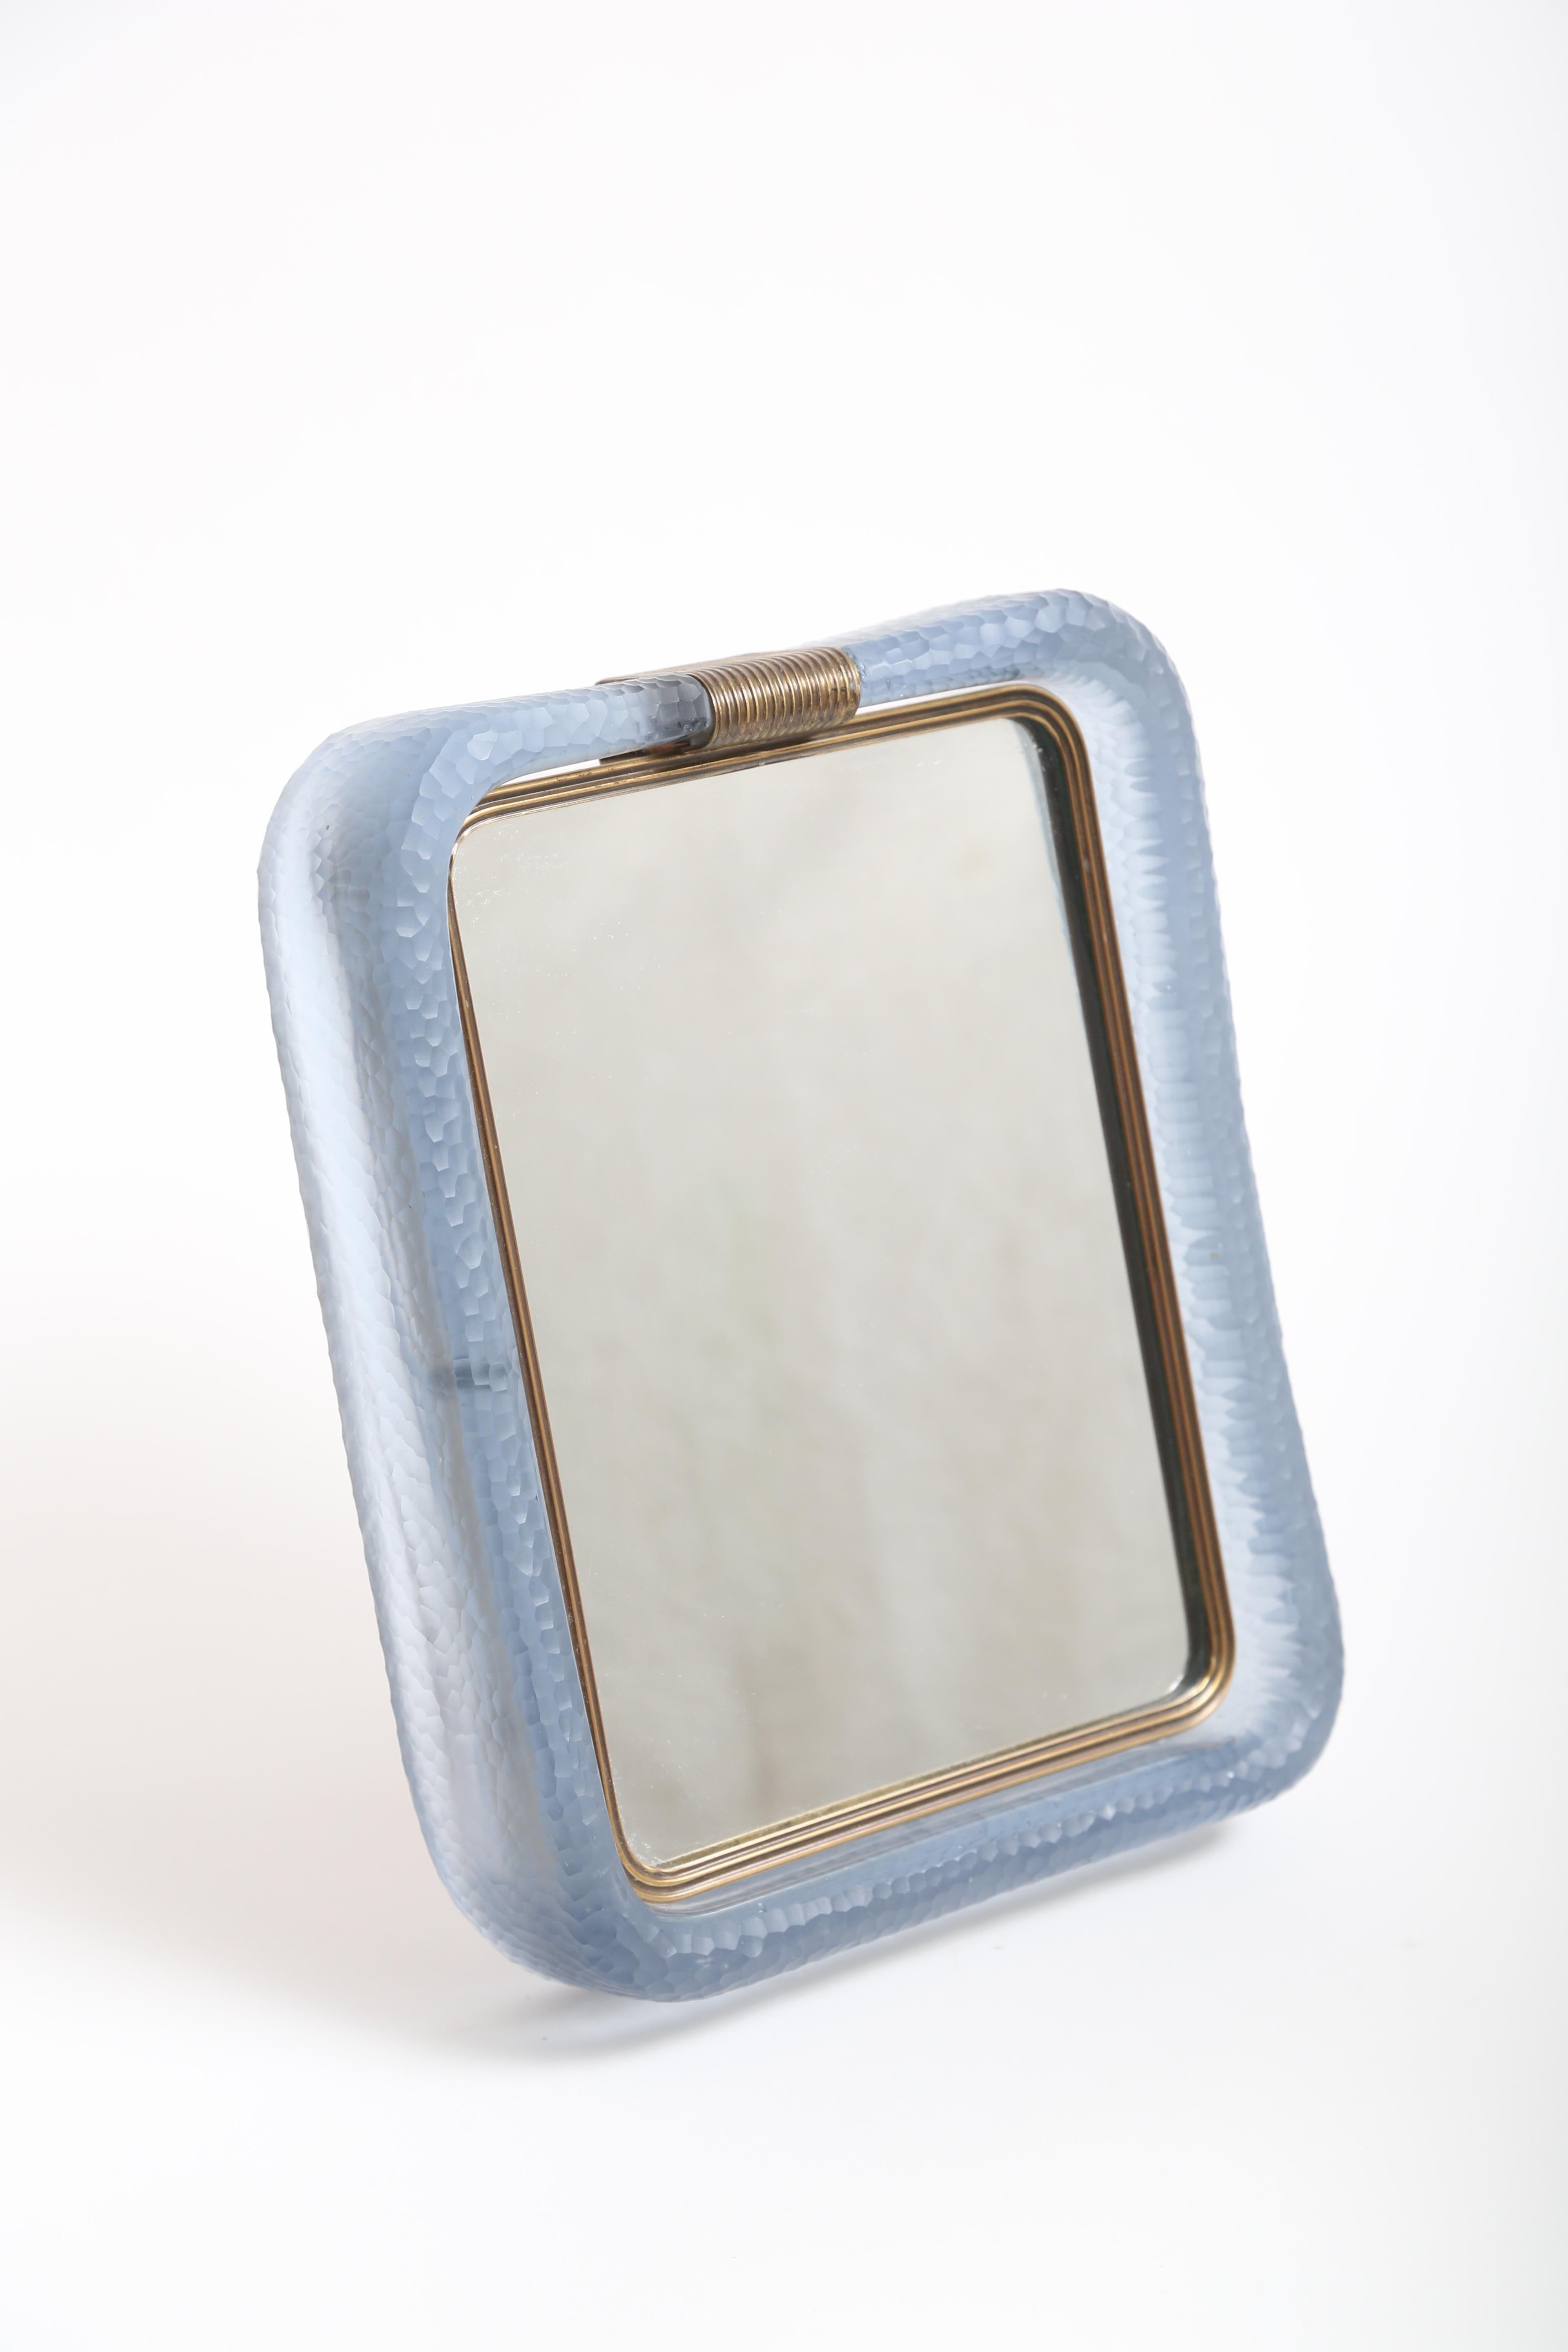 Sky blue mirror or picture frame in the Battuto Technique.
Produced circa 1940 by Venini.
Brass frame stand impressed with Venini/ Murano and Made In Italy Stamps.